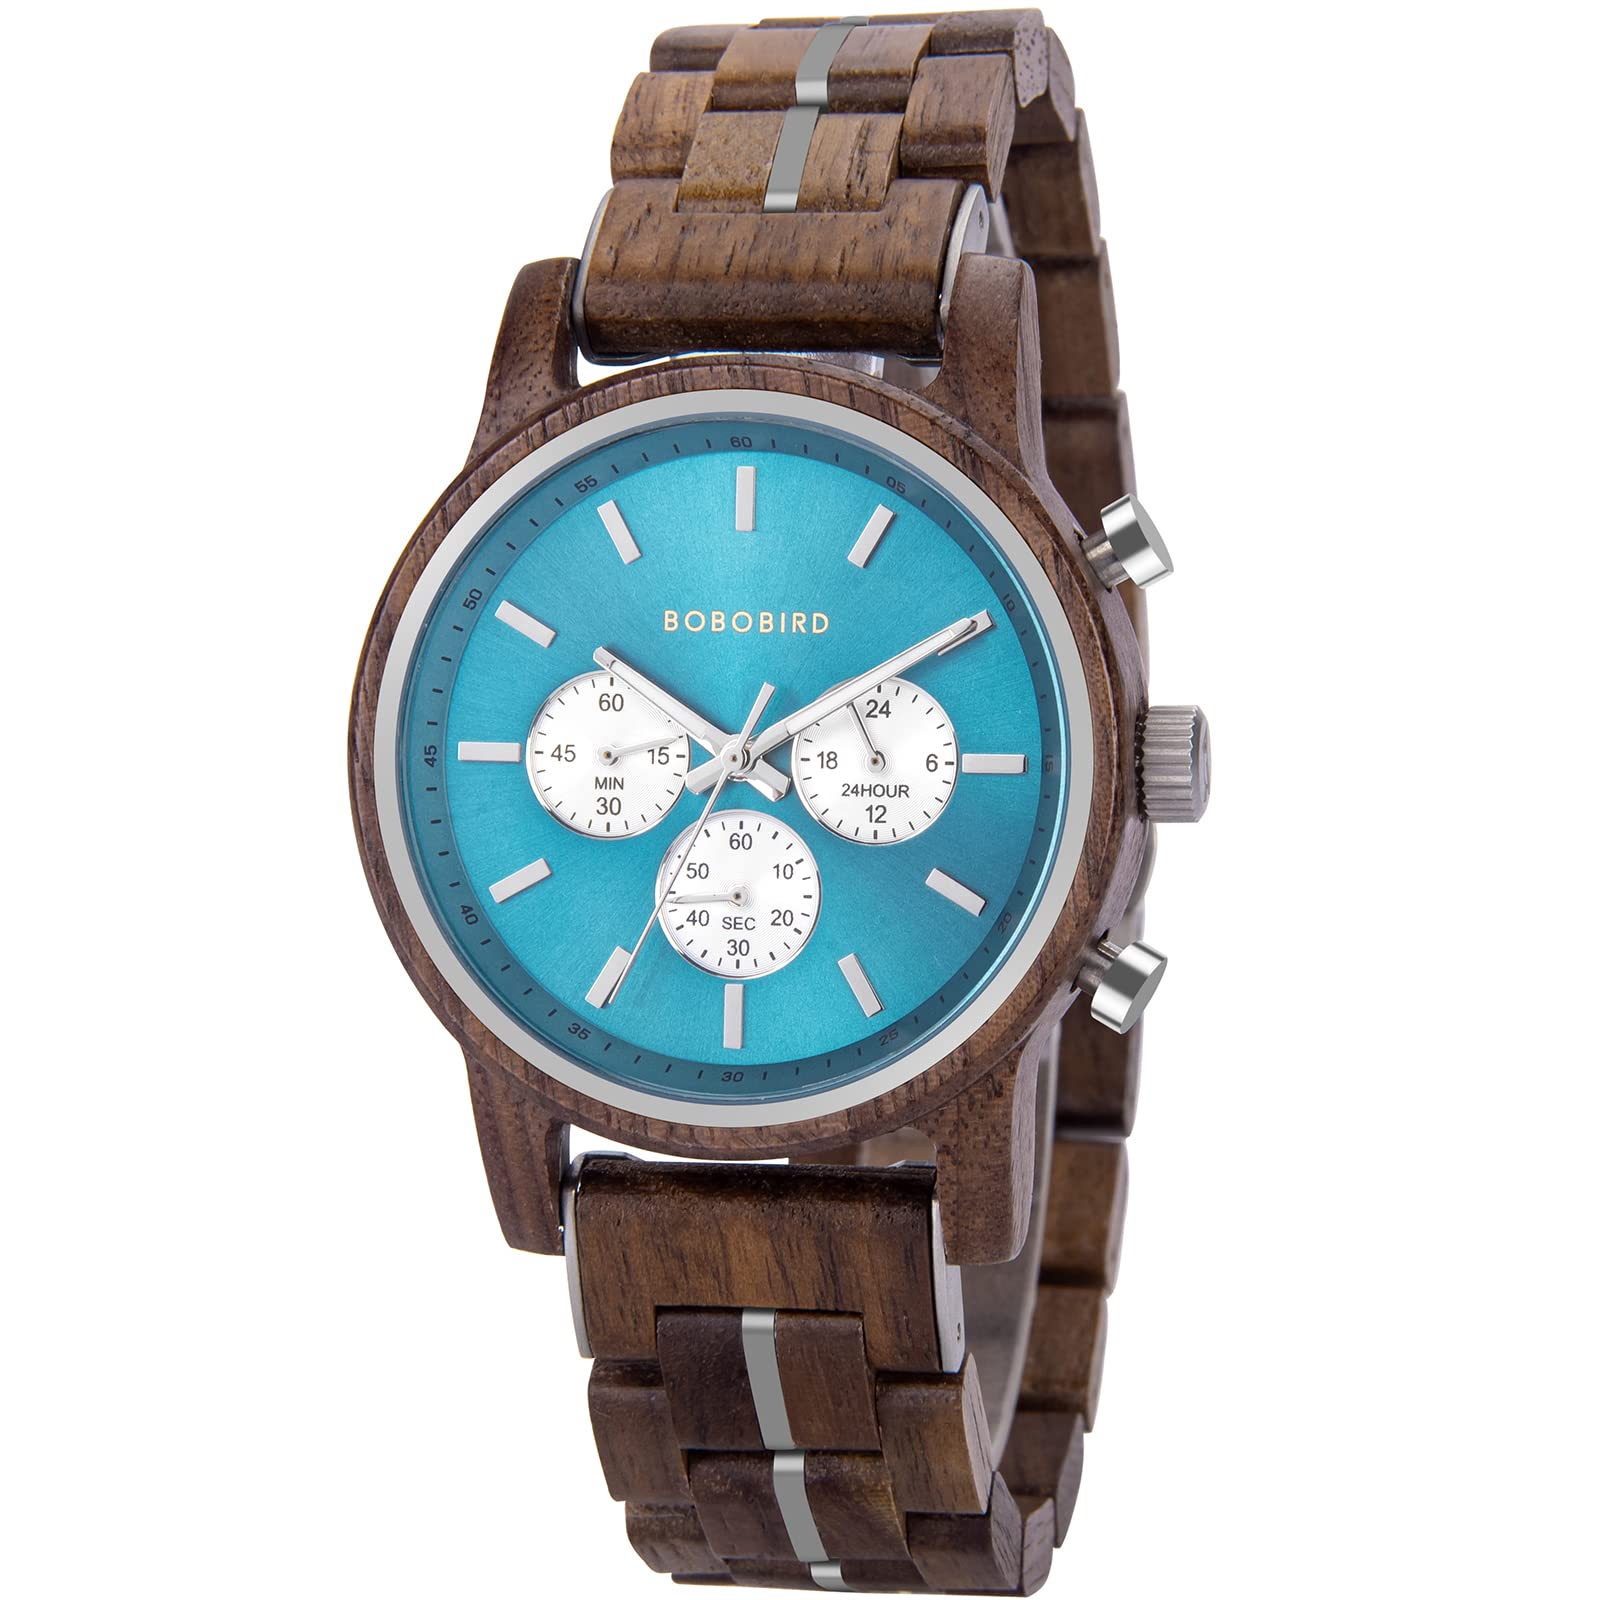 BOBO BIRD Mens Quartz Analog Watch Chronograph Wood Stainless Steel Watches Casual Fashion with Luminous Hands 送料無